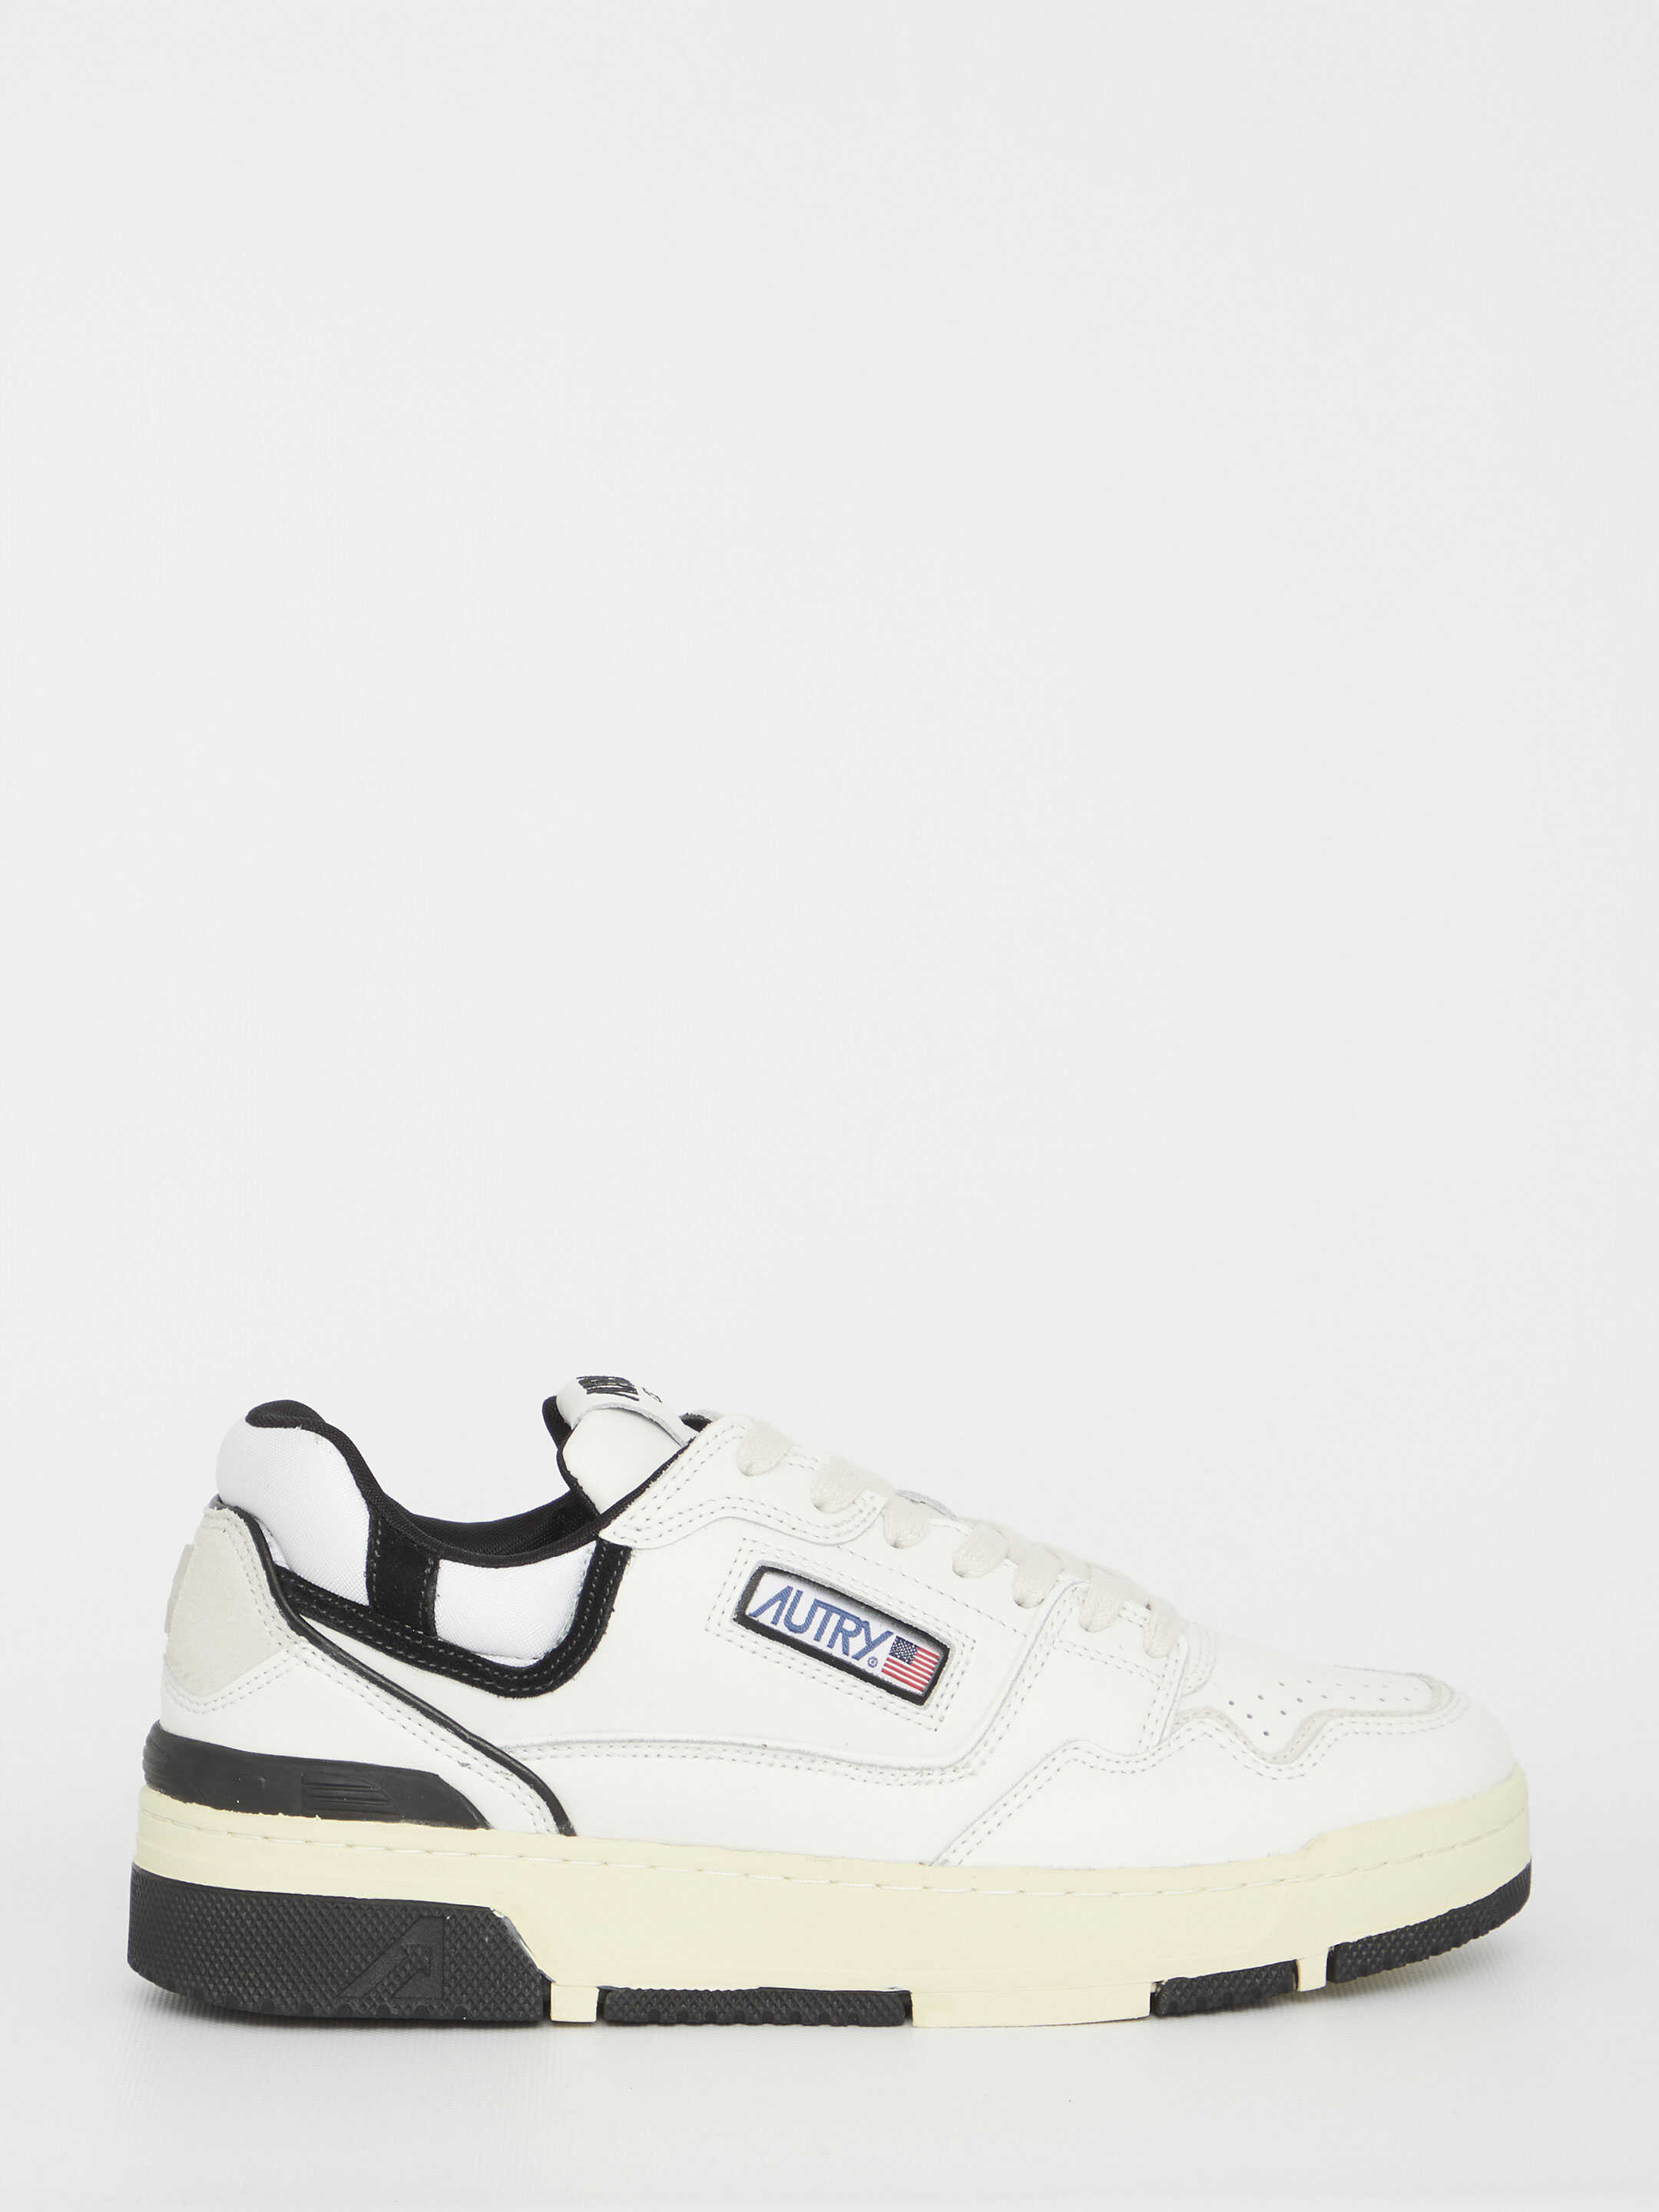 AUTRY Clc Sneakers WHITE image14